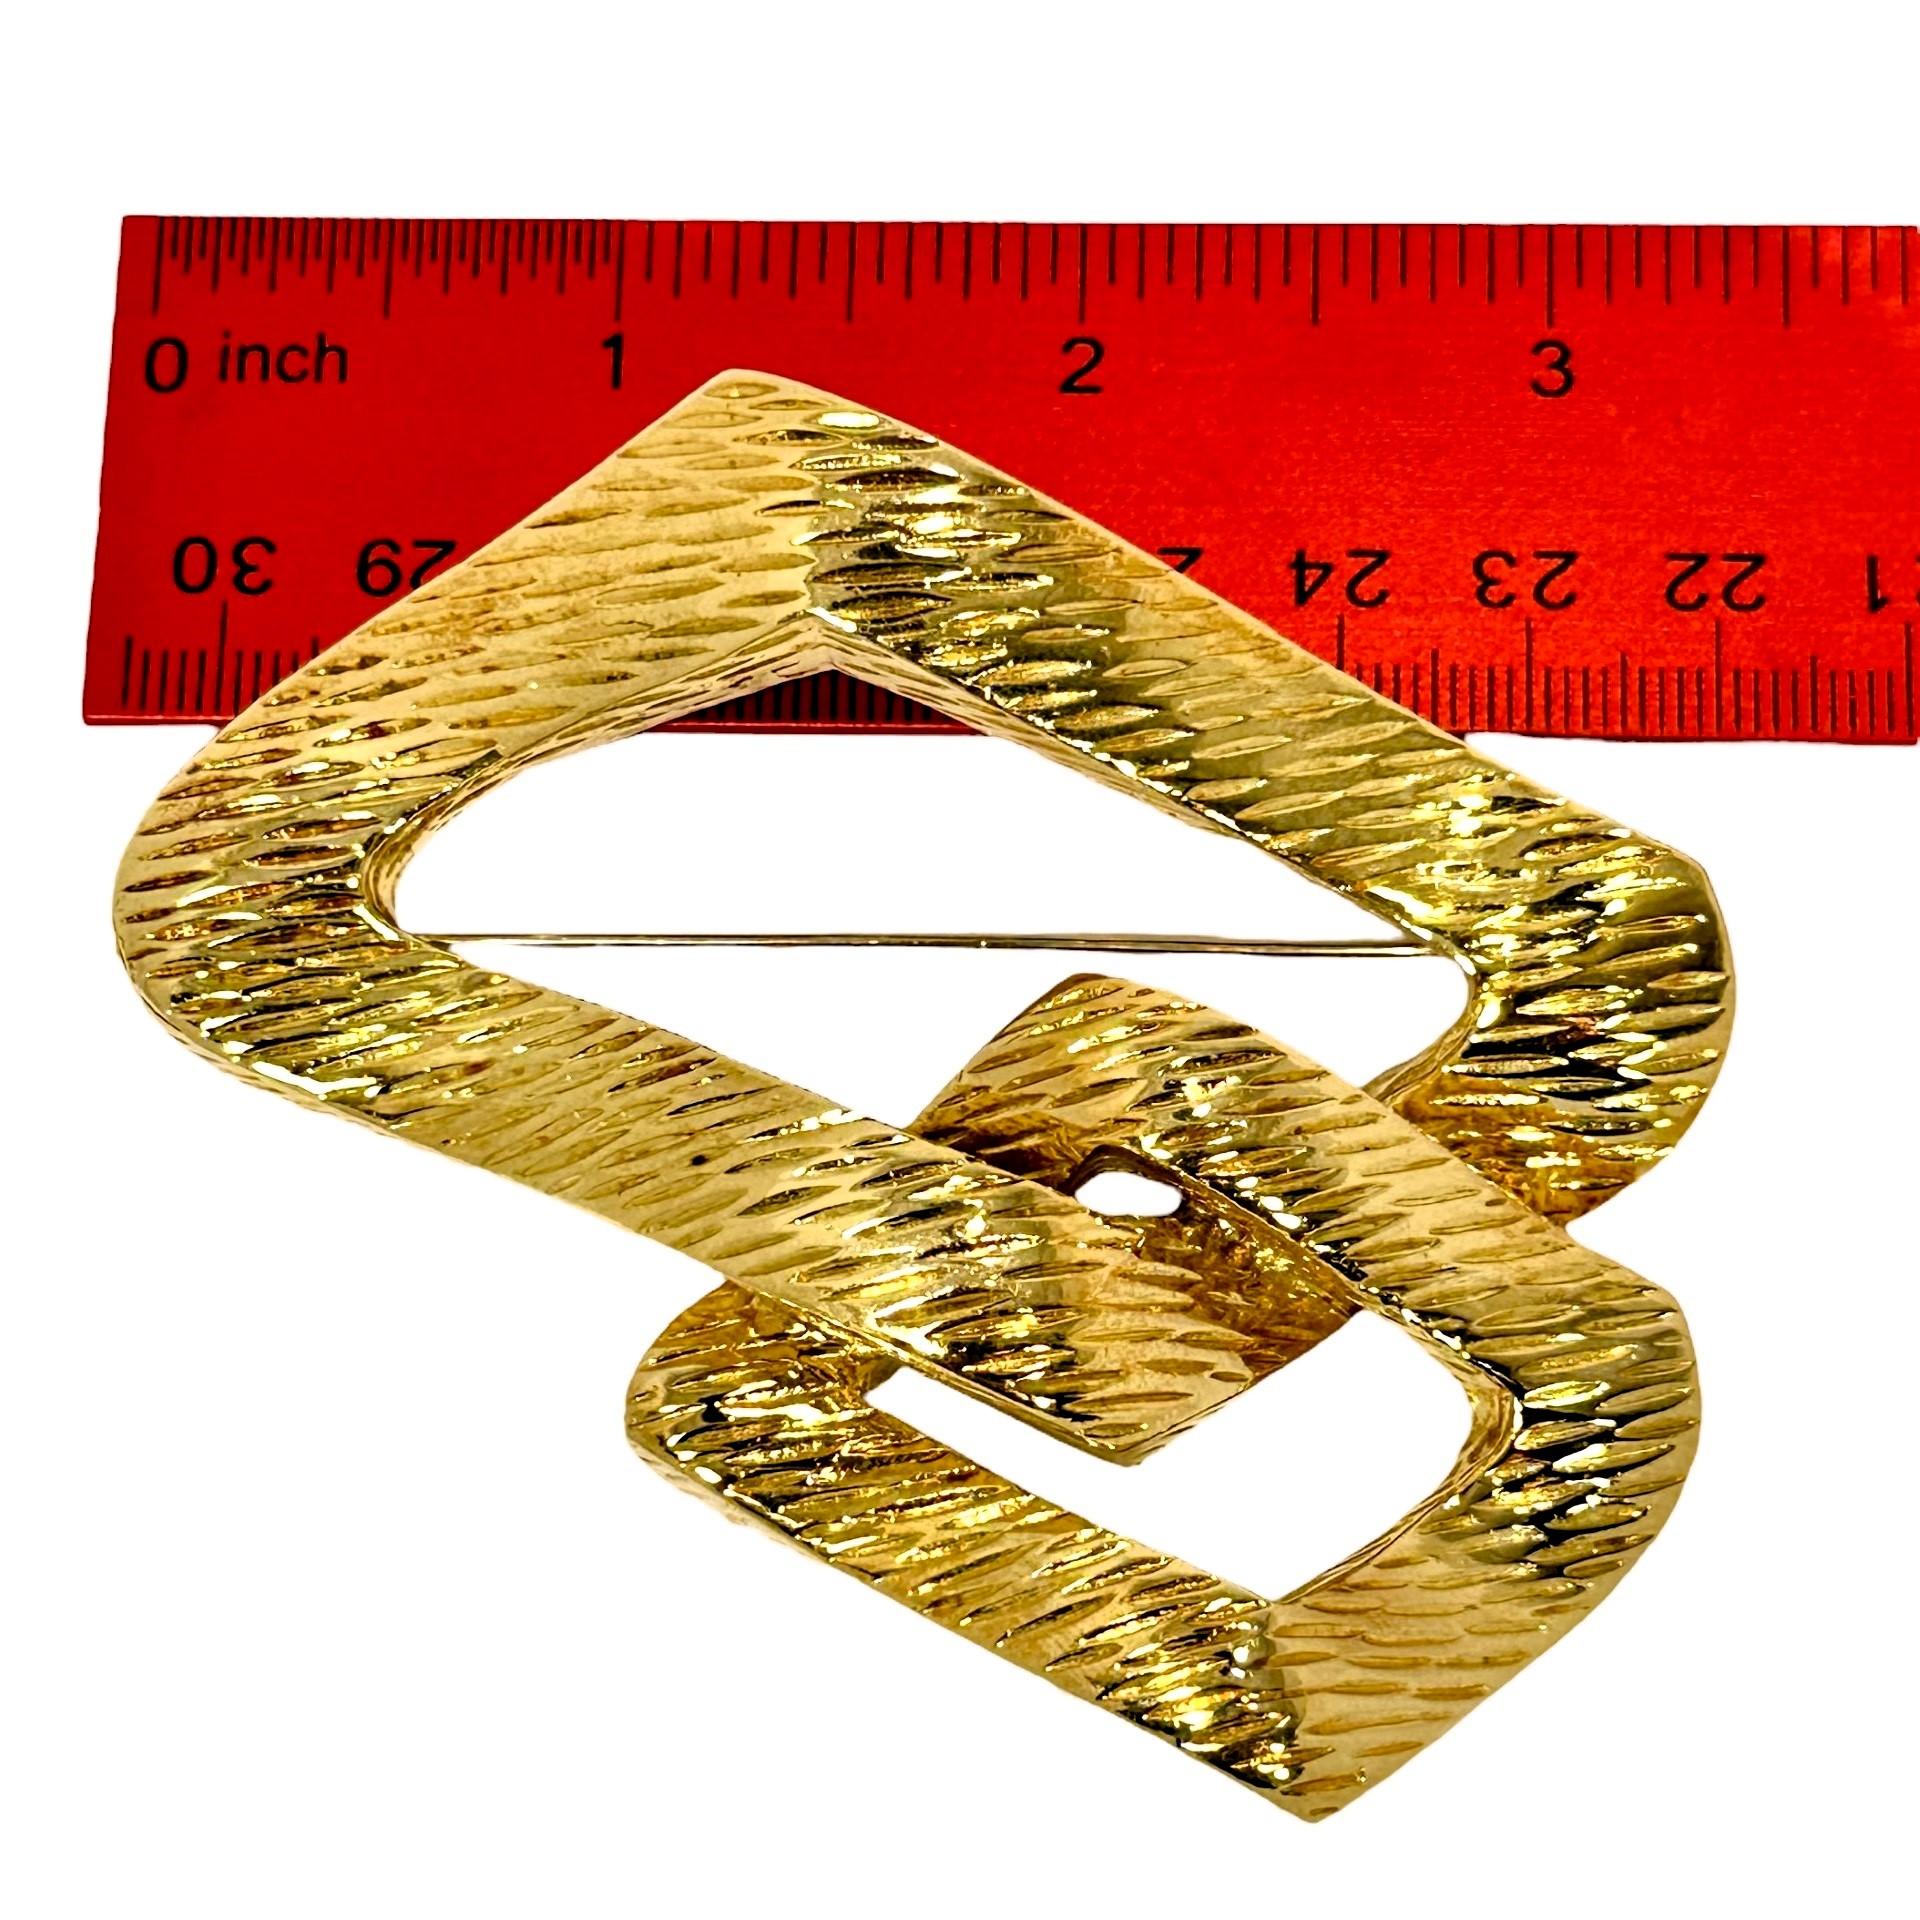 1960s-1970s French Bark Finish Gold Pendant Brooch by Wander 3 1/2 Inches Long  For Sale 3